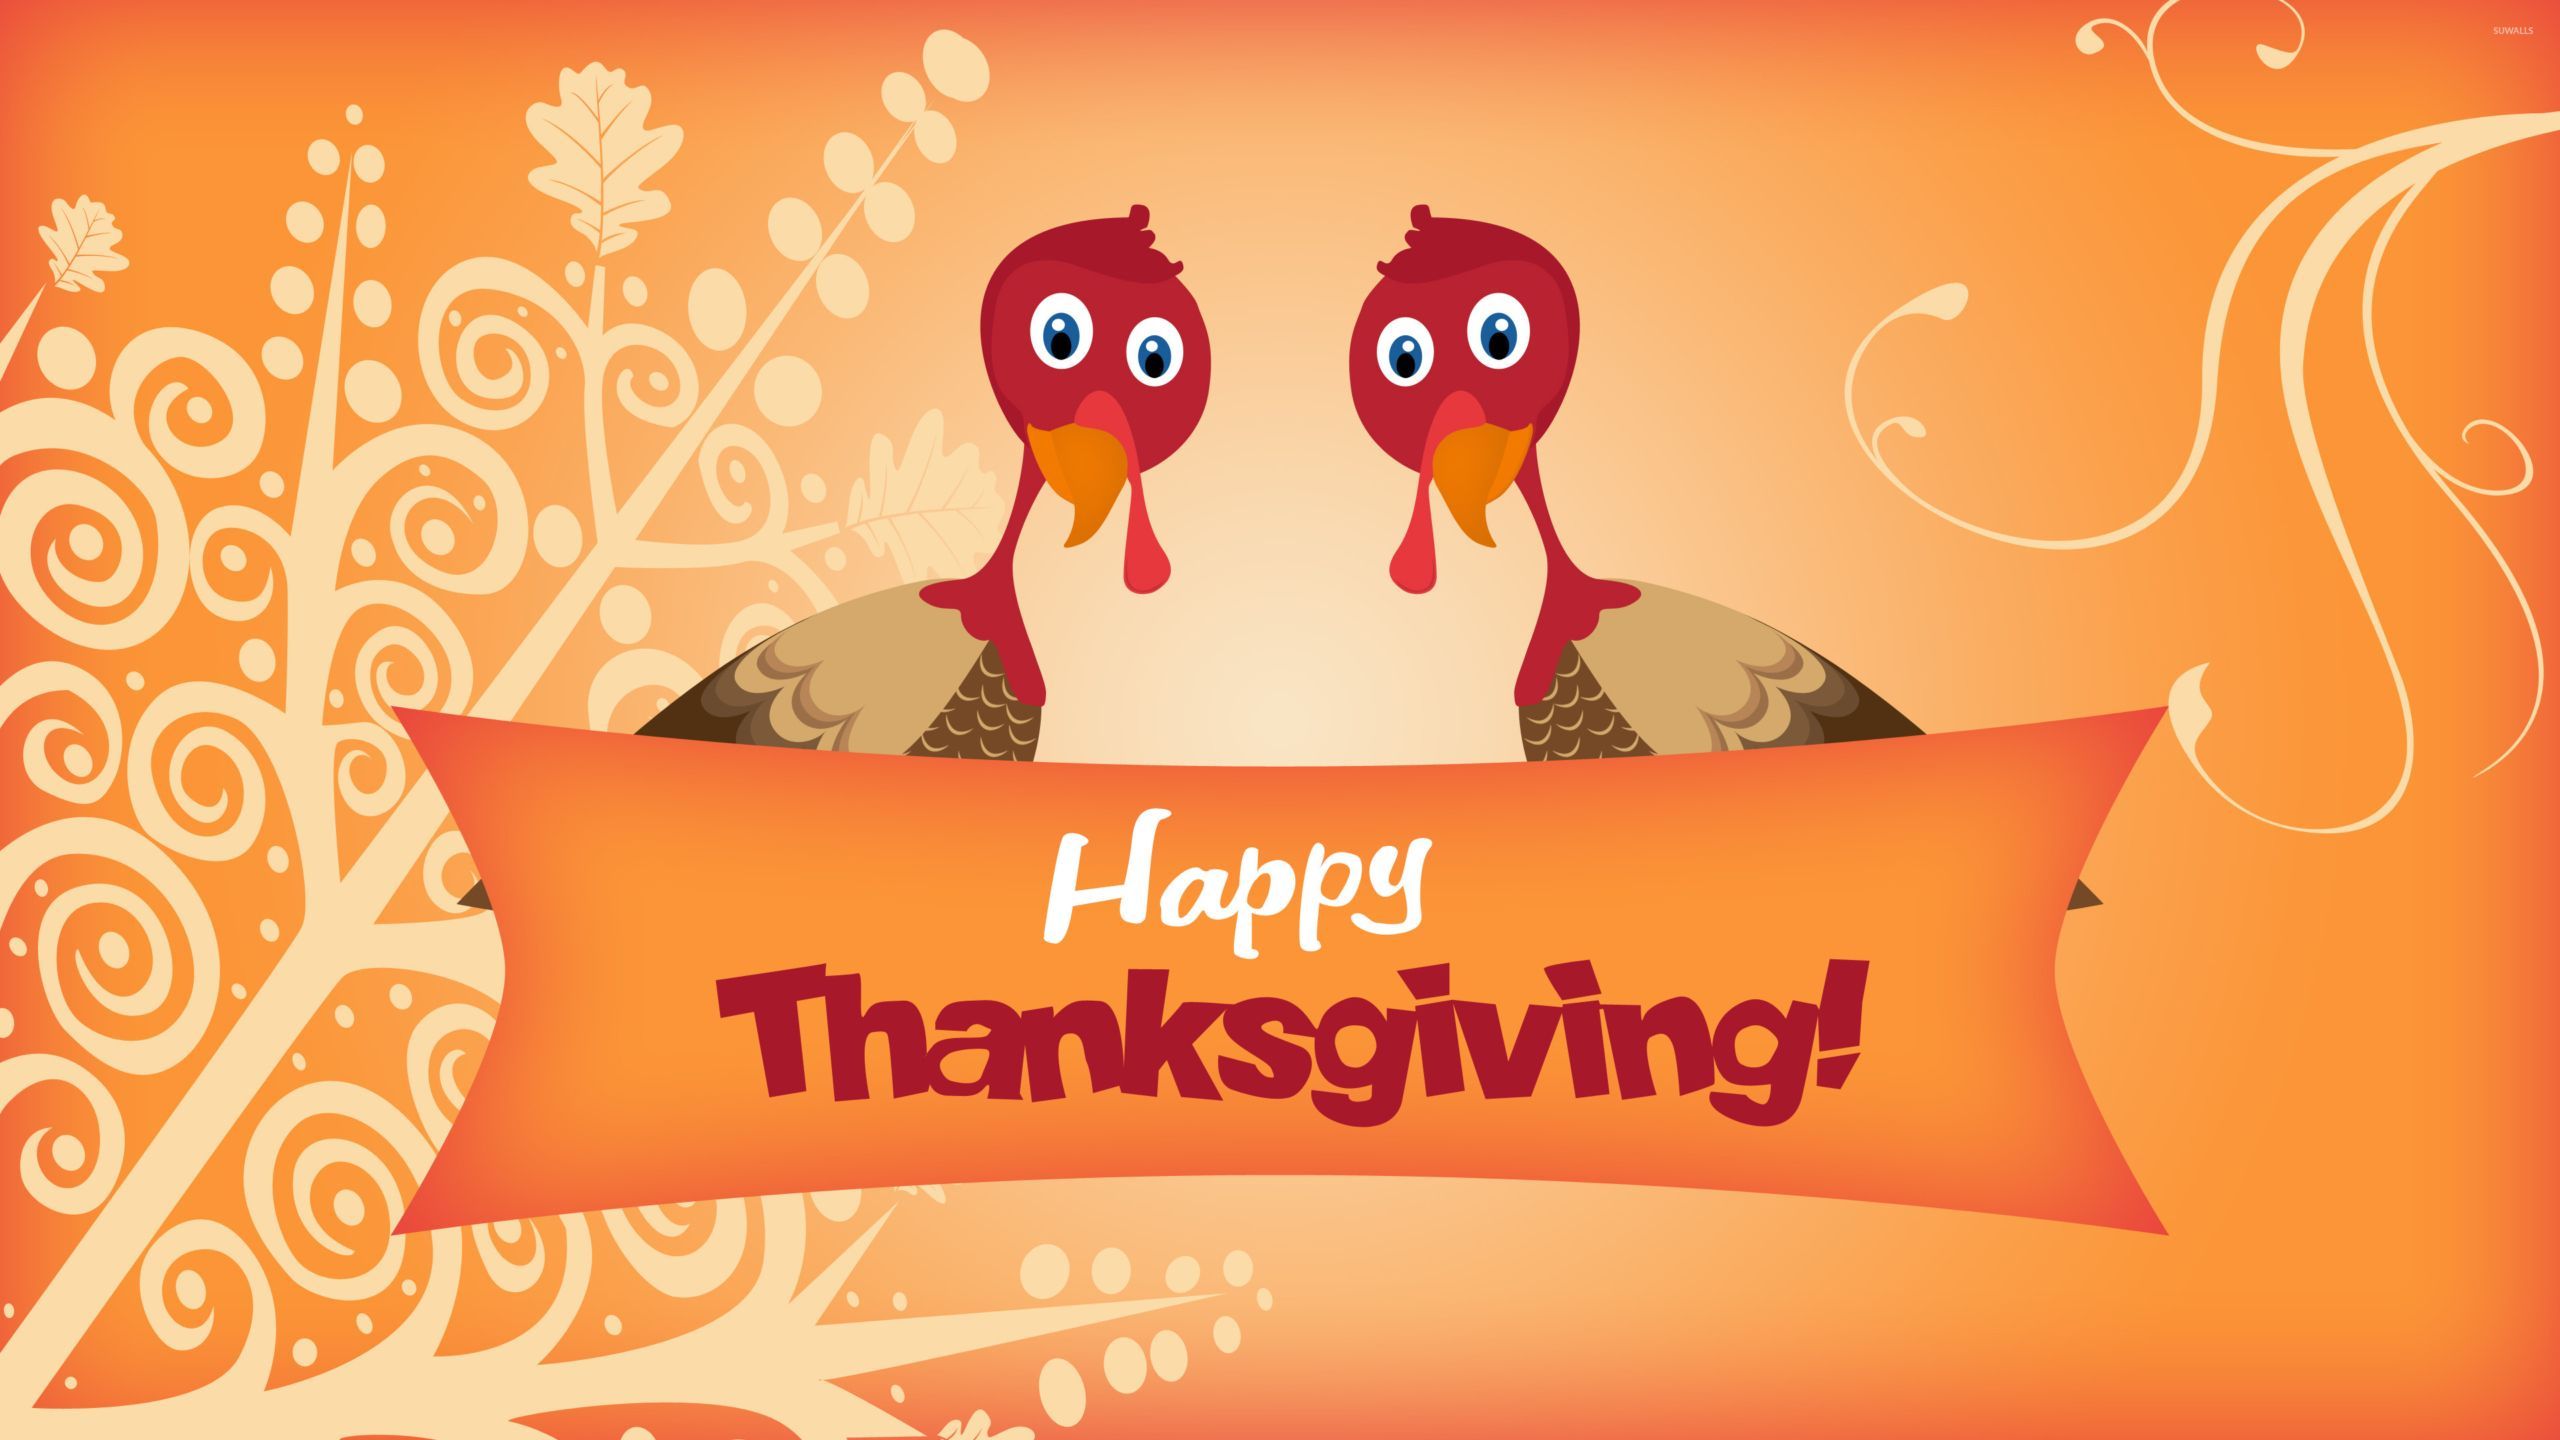 Thanksgiving Wallpaper Great Way to Show How grateful You Are